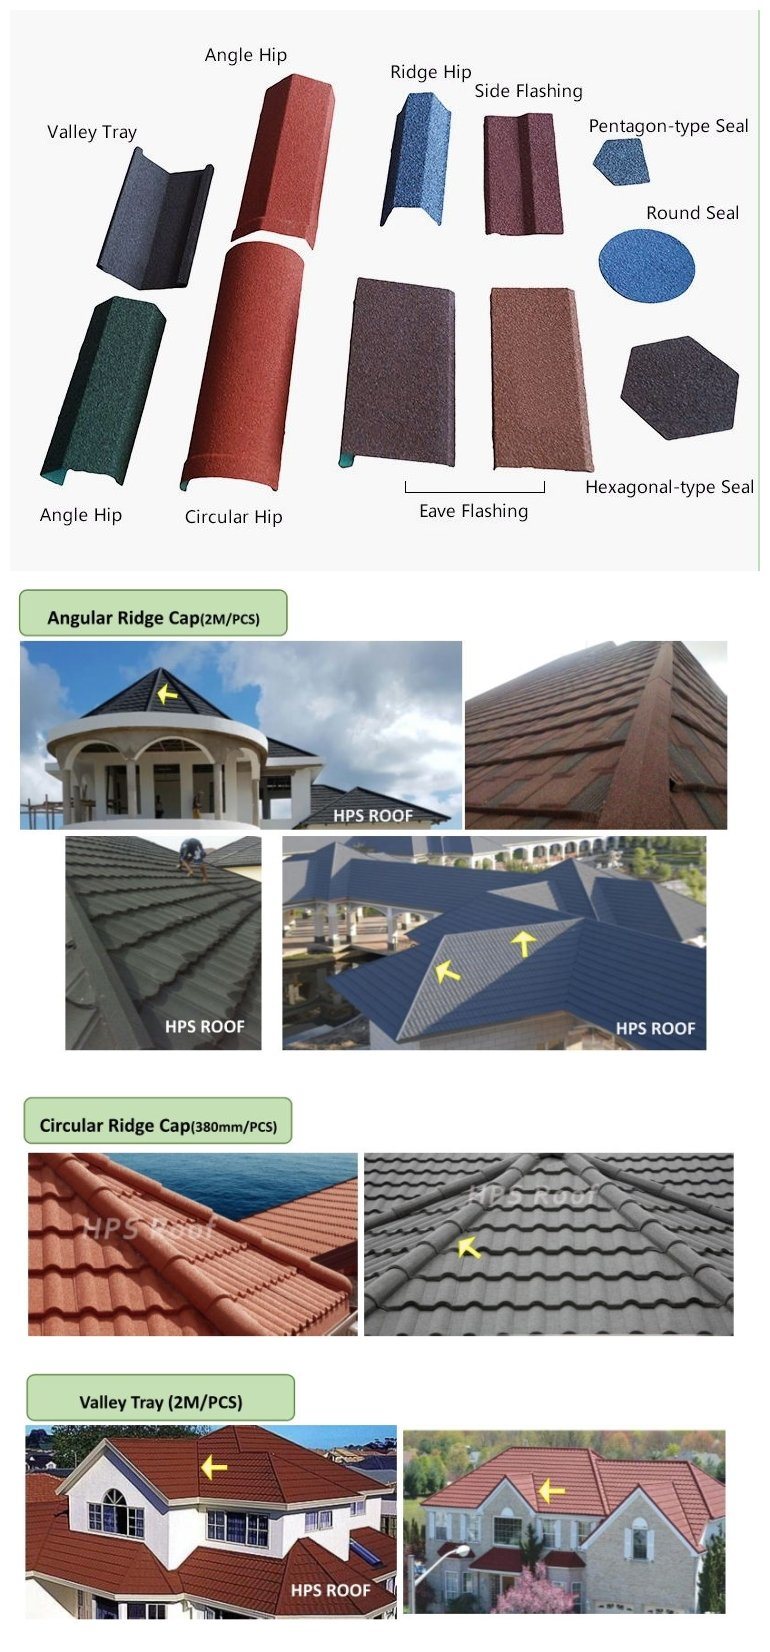 Aluminum Steel Stone Roof Tile Roofing Material Stone Coated Metal Roof Tile Sheet